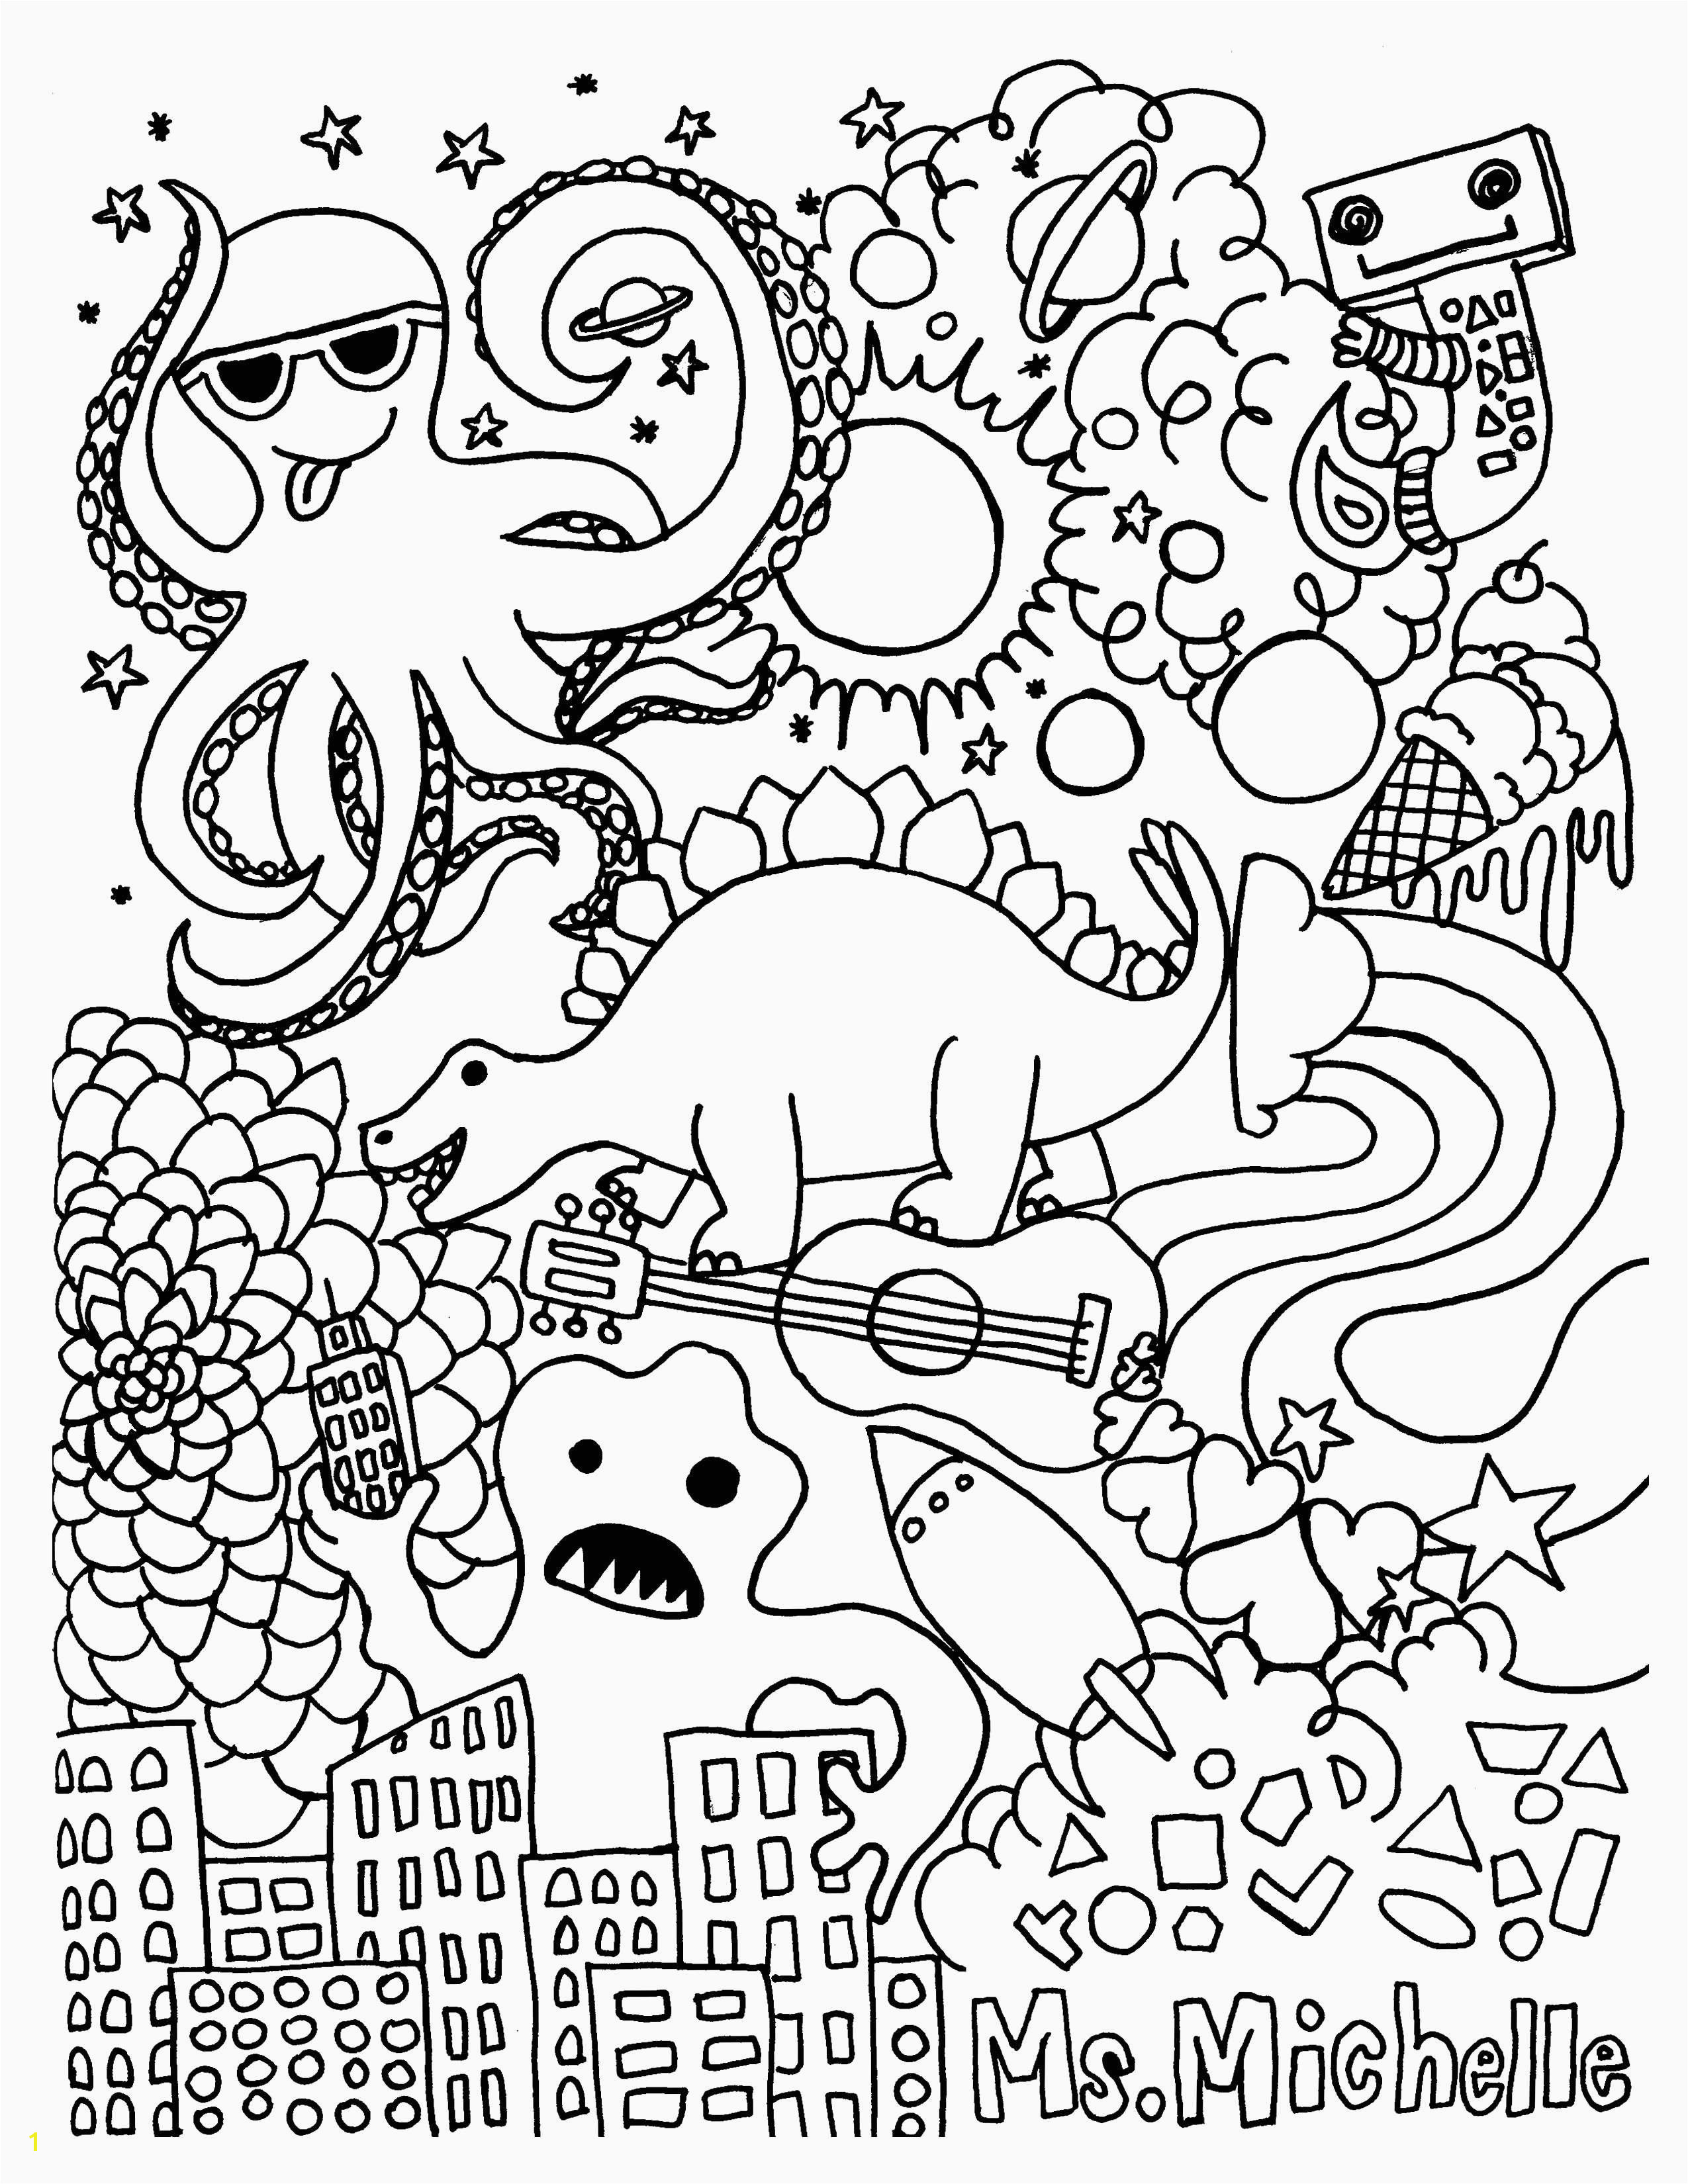 Halloween Coloring Pages Hard Mermaid Coloring Pages Sample thephotosync